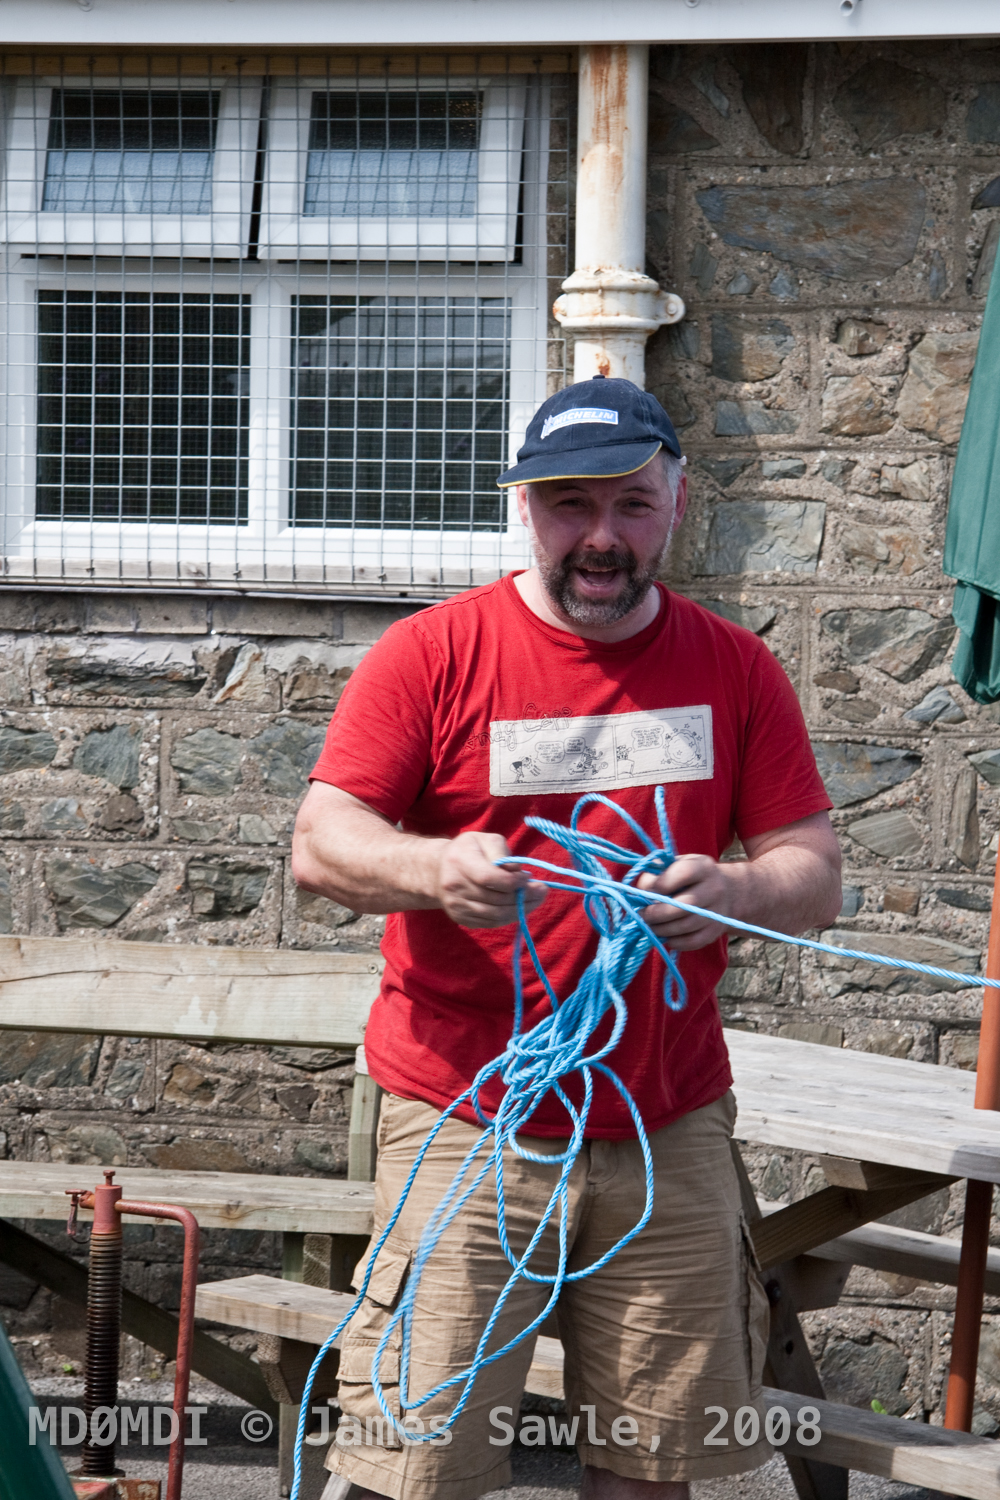 Steve Kelly (GD7DUZ) even has time to show off his knotting skills, the only problem was that he could not undo his masterpiece! Opps!